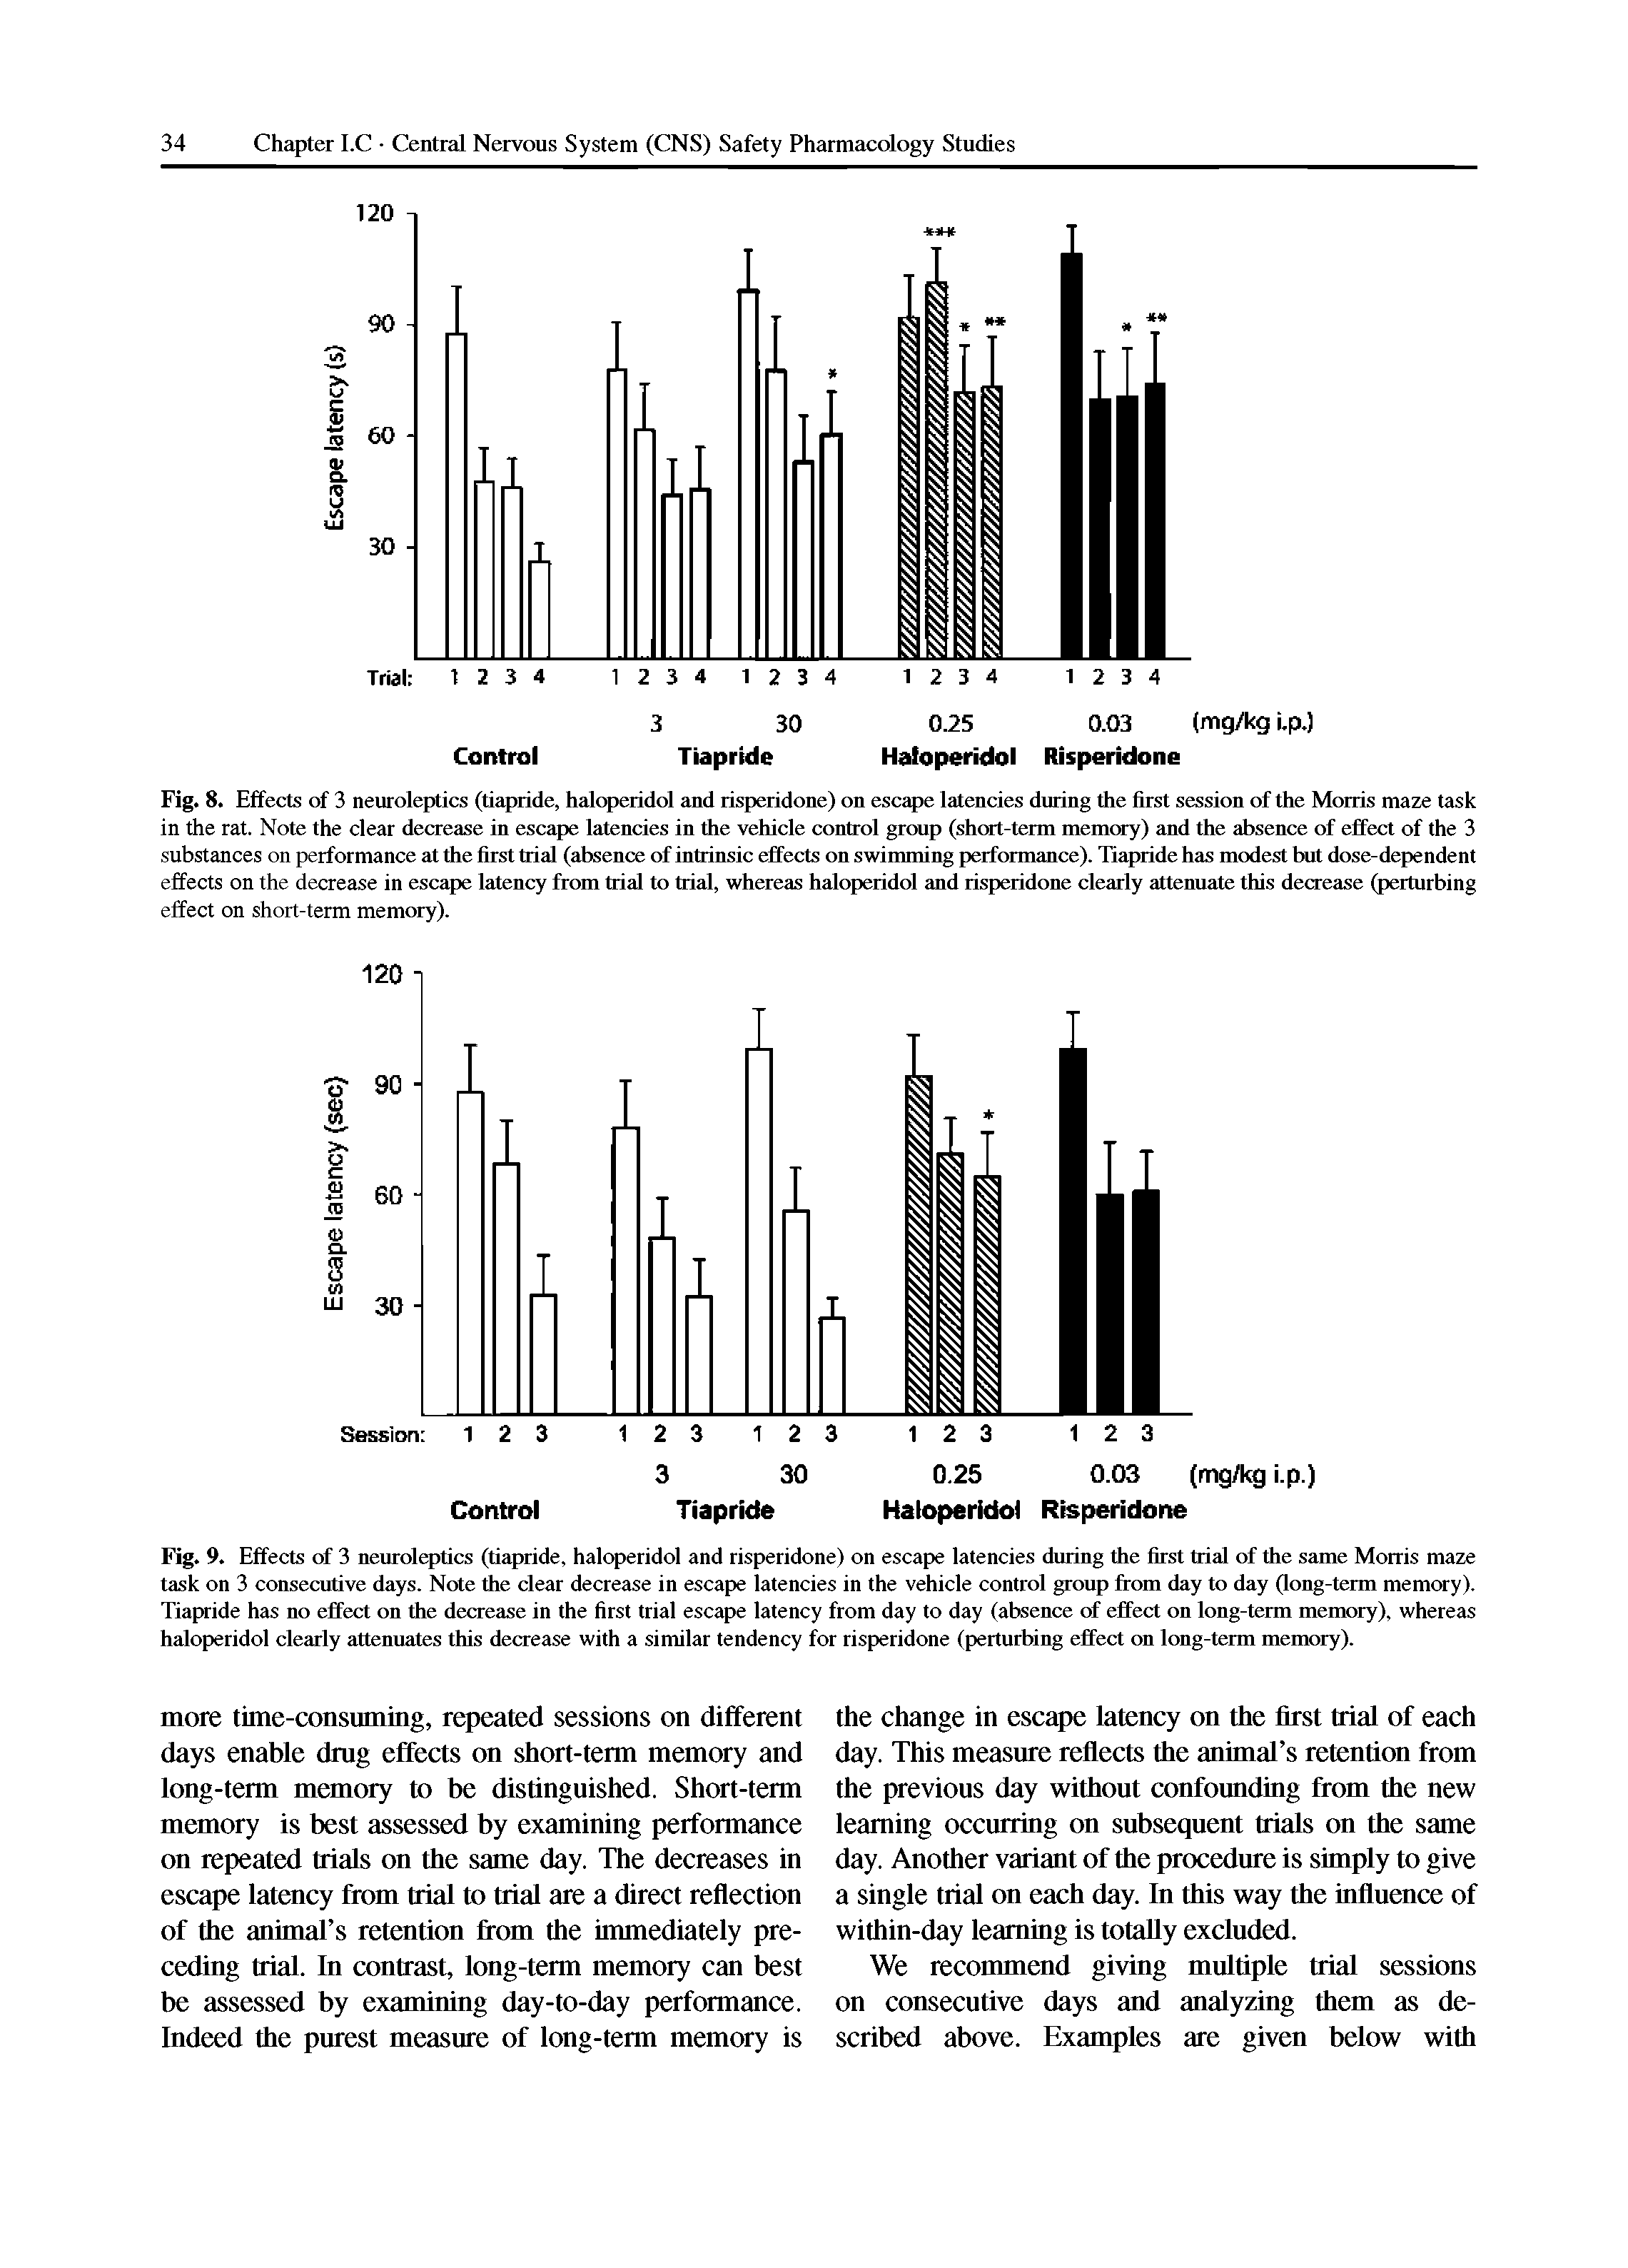 Fig. 9. Effects of 3 neuroleptics (tiapride, haloperidol and risperidone) on escape latencies during the first trial of the same Morris maze task on 3 consecutive days. Note the clear decrease in escape latencies in the vehicle control group from day to day (long-term memory). Tiapride has no effect on the decrease in the first trial escape latency from day to day (absence of effect on long-term memory), whereas haloperidol clearly attenuates this decrease with a similar tendency for risperidone (perturbing effect on long-term memory).